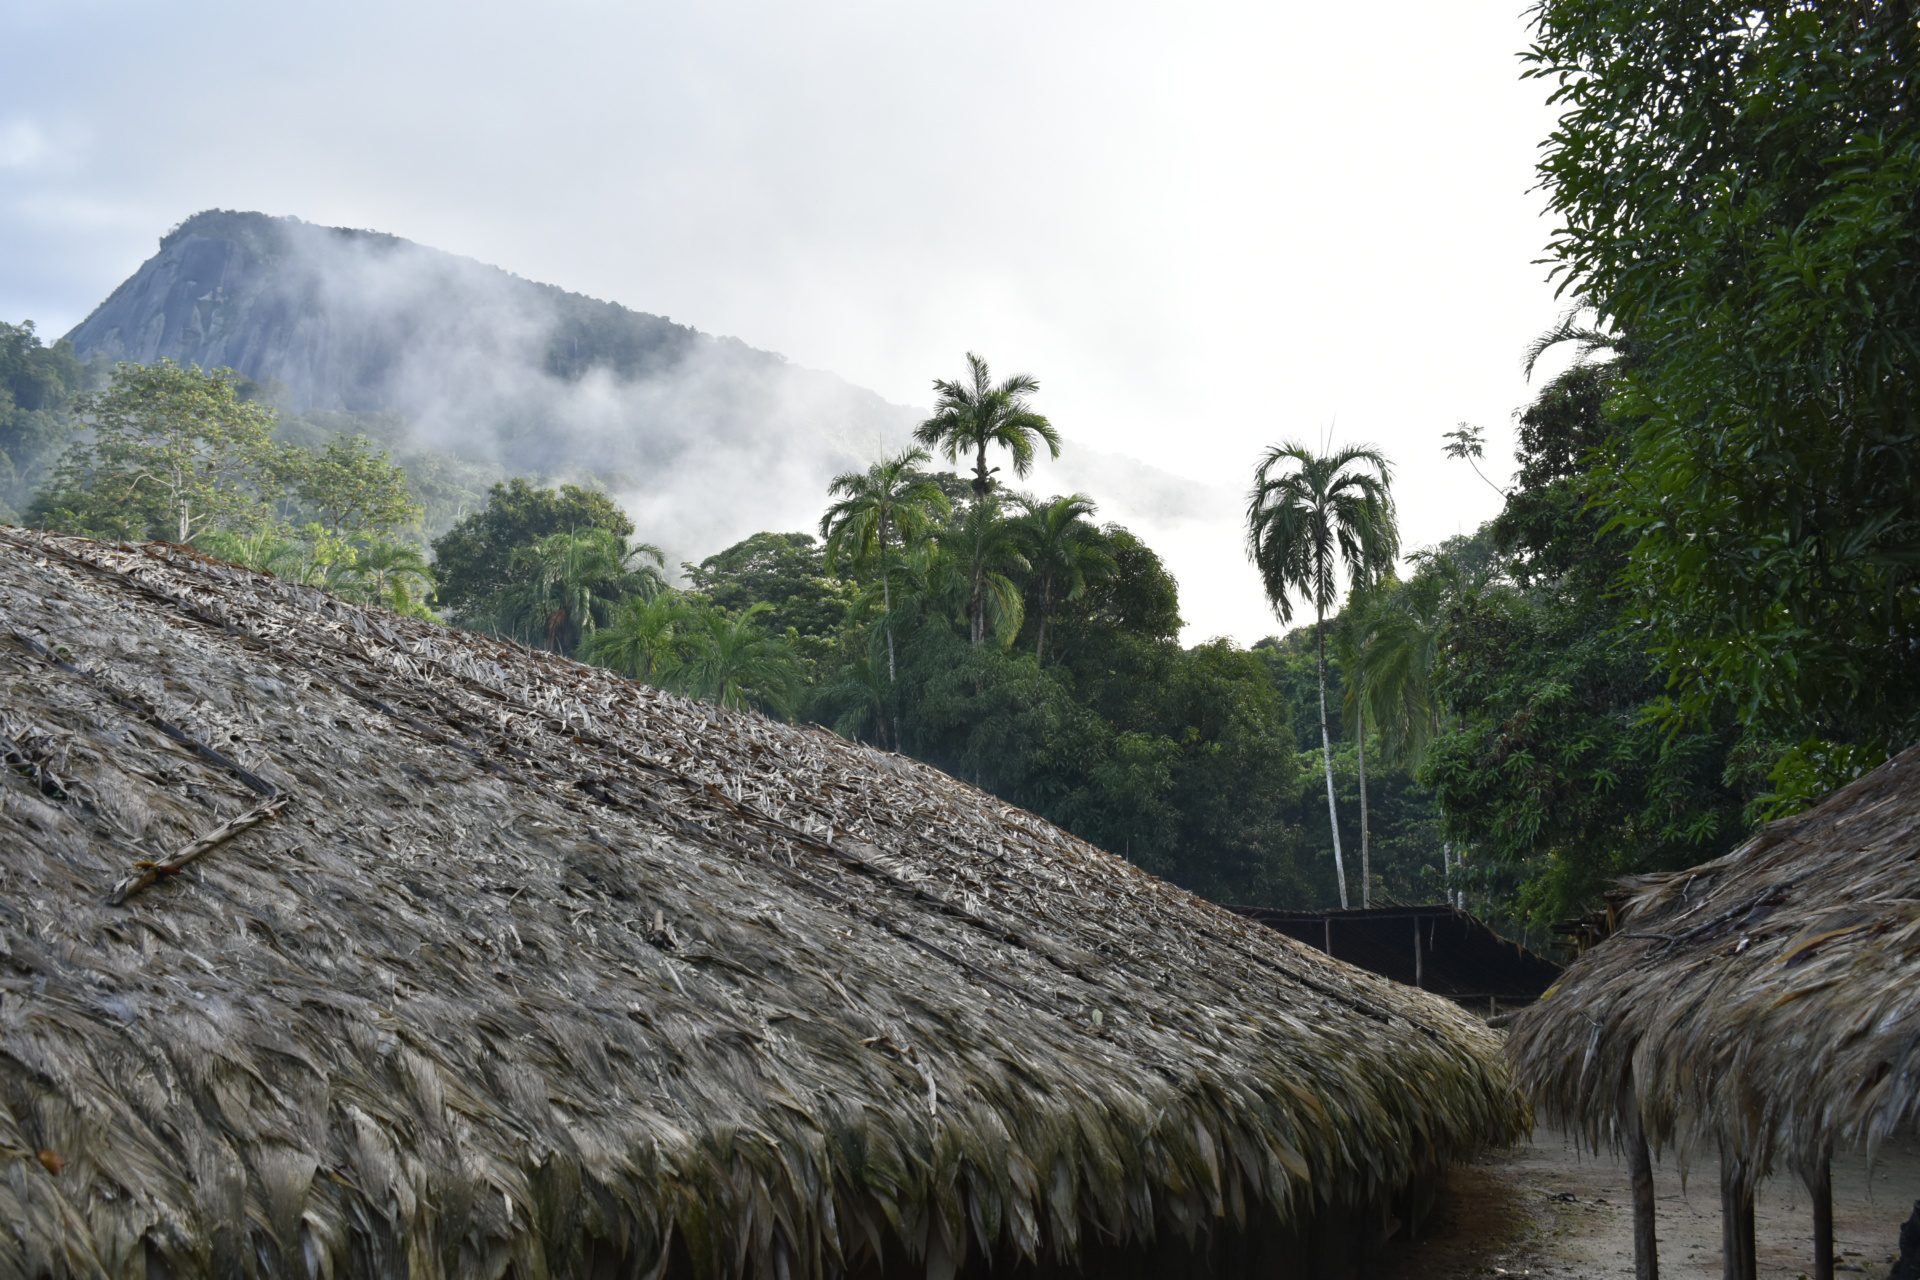 The village Demini is home for many Yanomami.